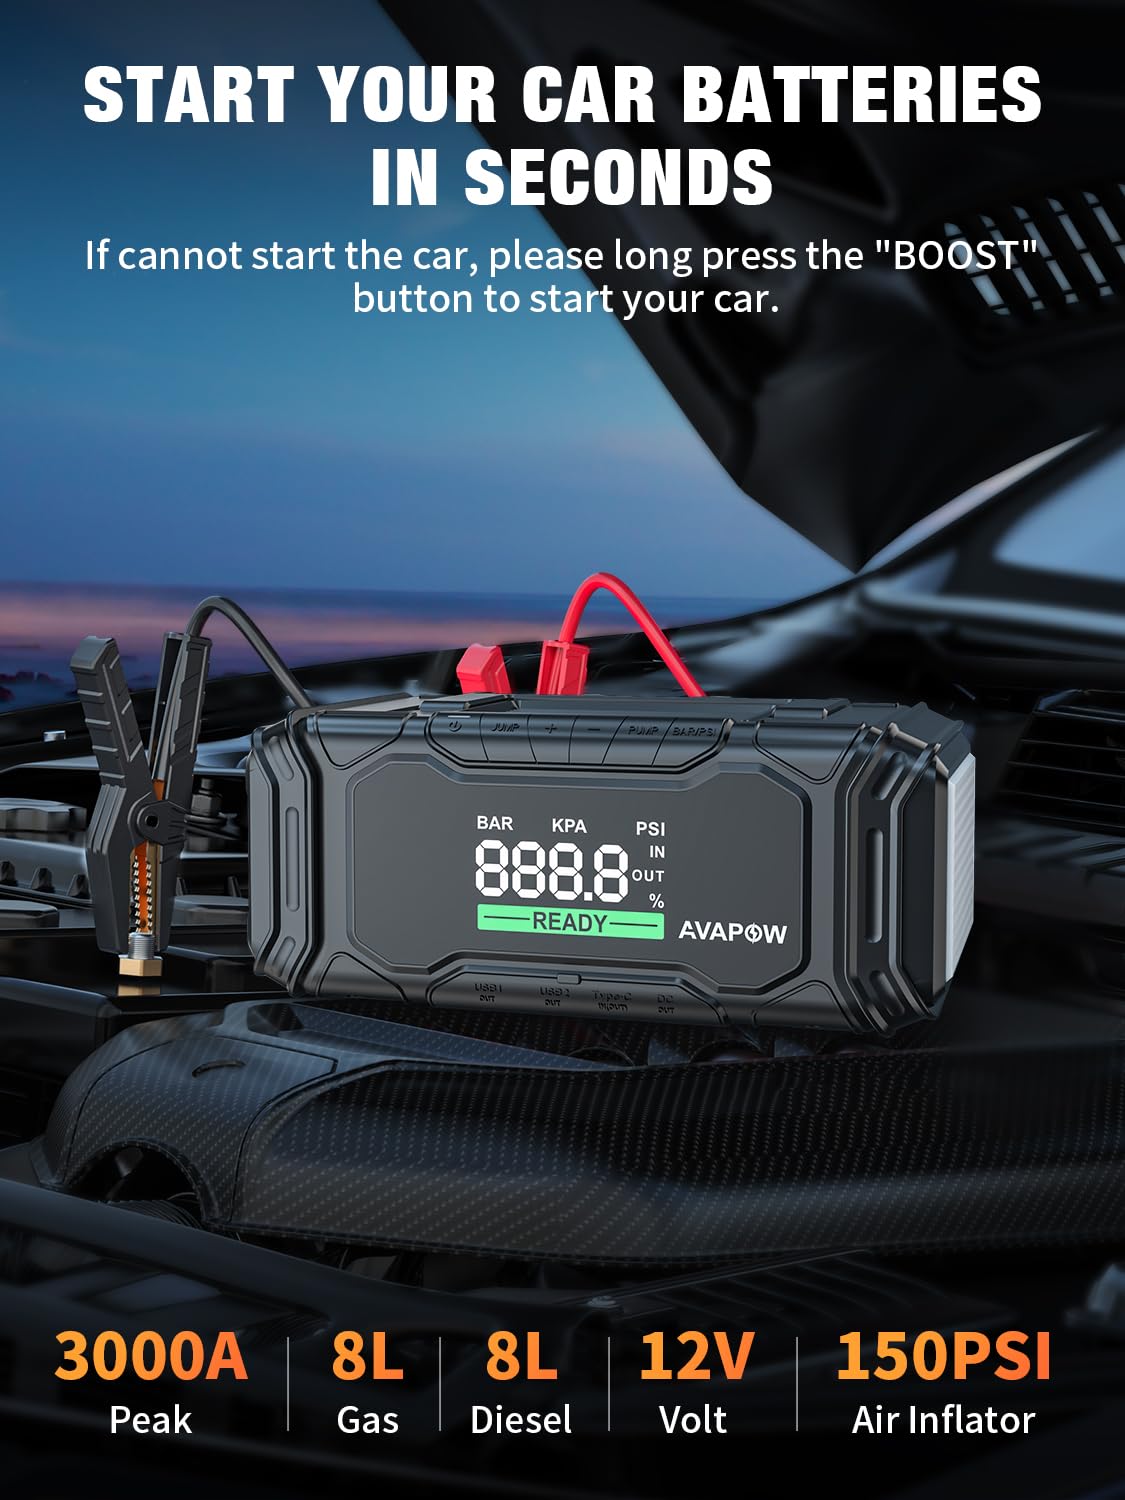 Jump Starter - 2000A Jump Starter Battery Pack for Up to 8L Gas and 6.5L  Diesel Engines, 12V Portable Car Battery Jump Starter Box with 3.0 LCD